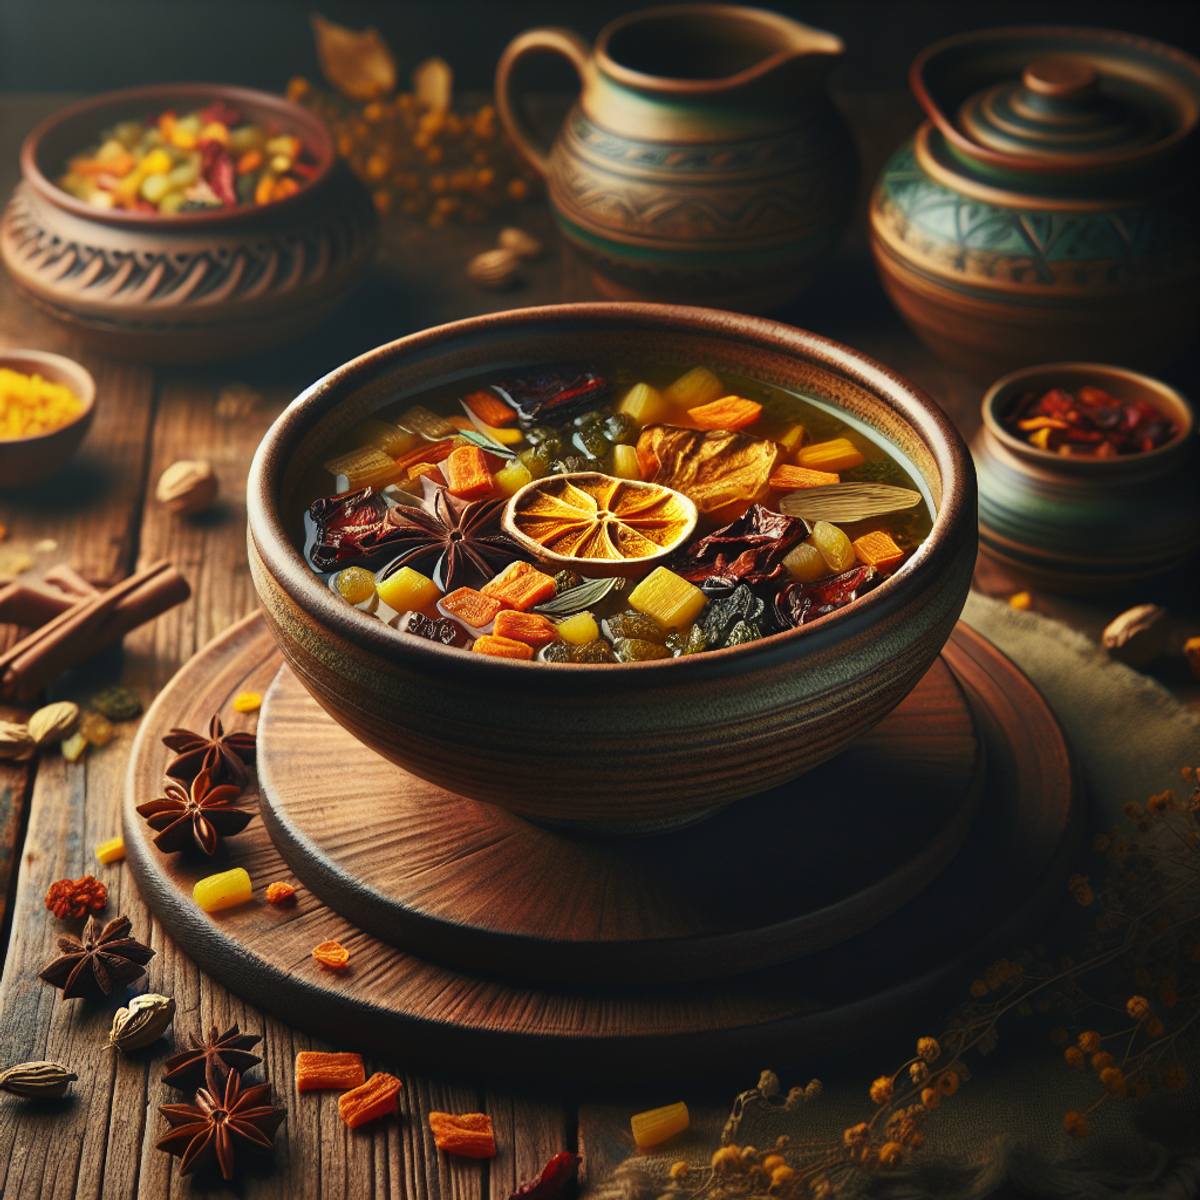 Steaming vegetable soup in ceramic bowl on rustic wooden table